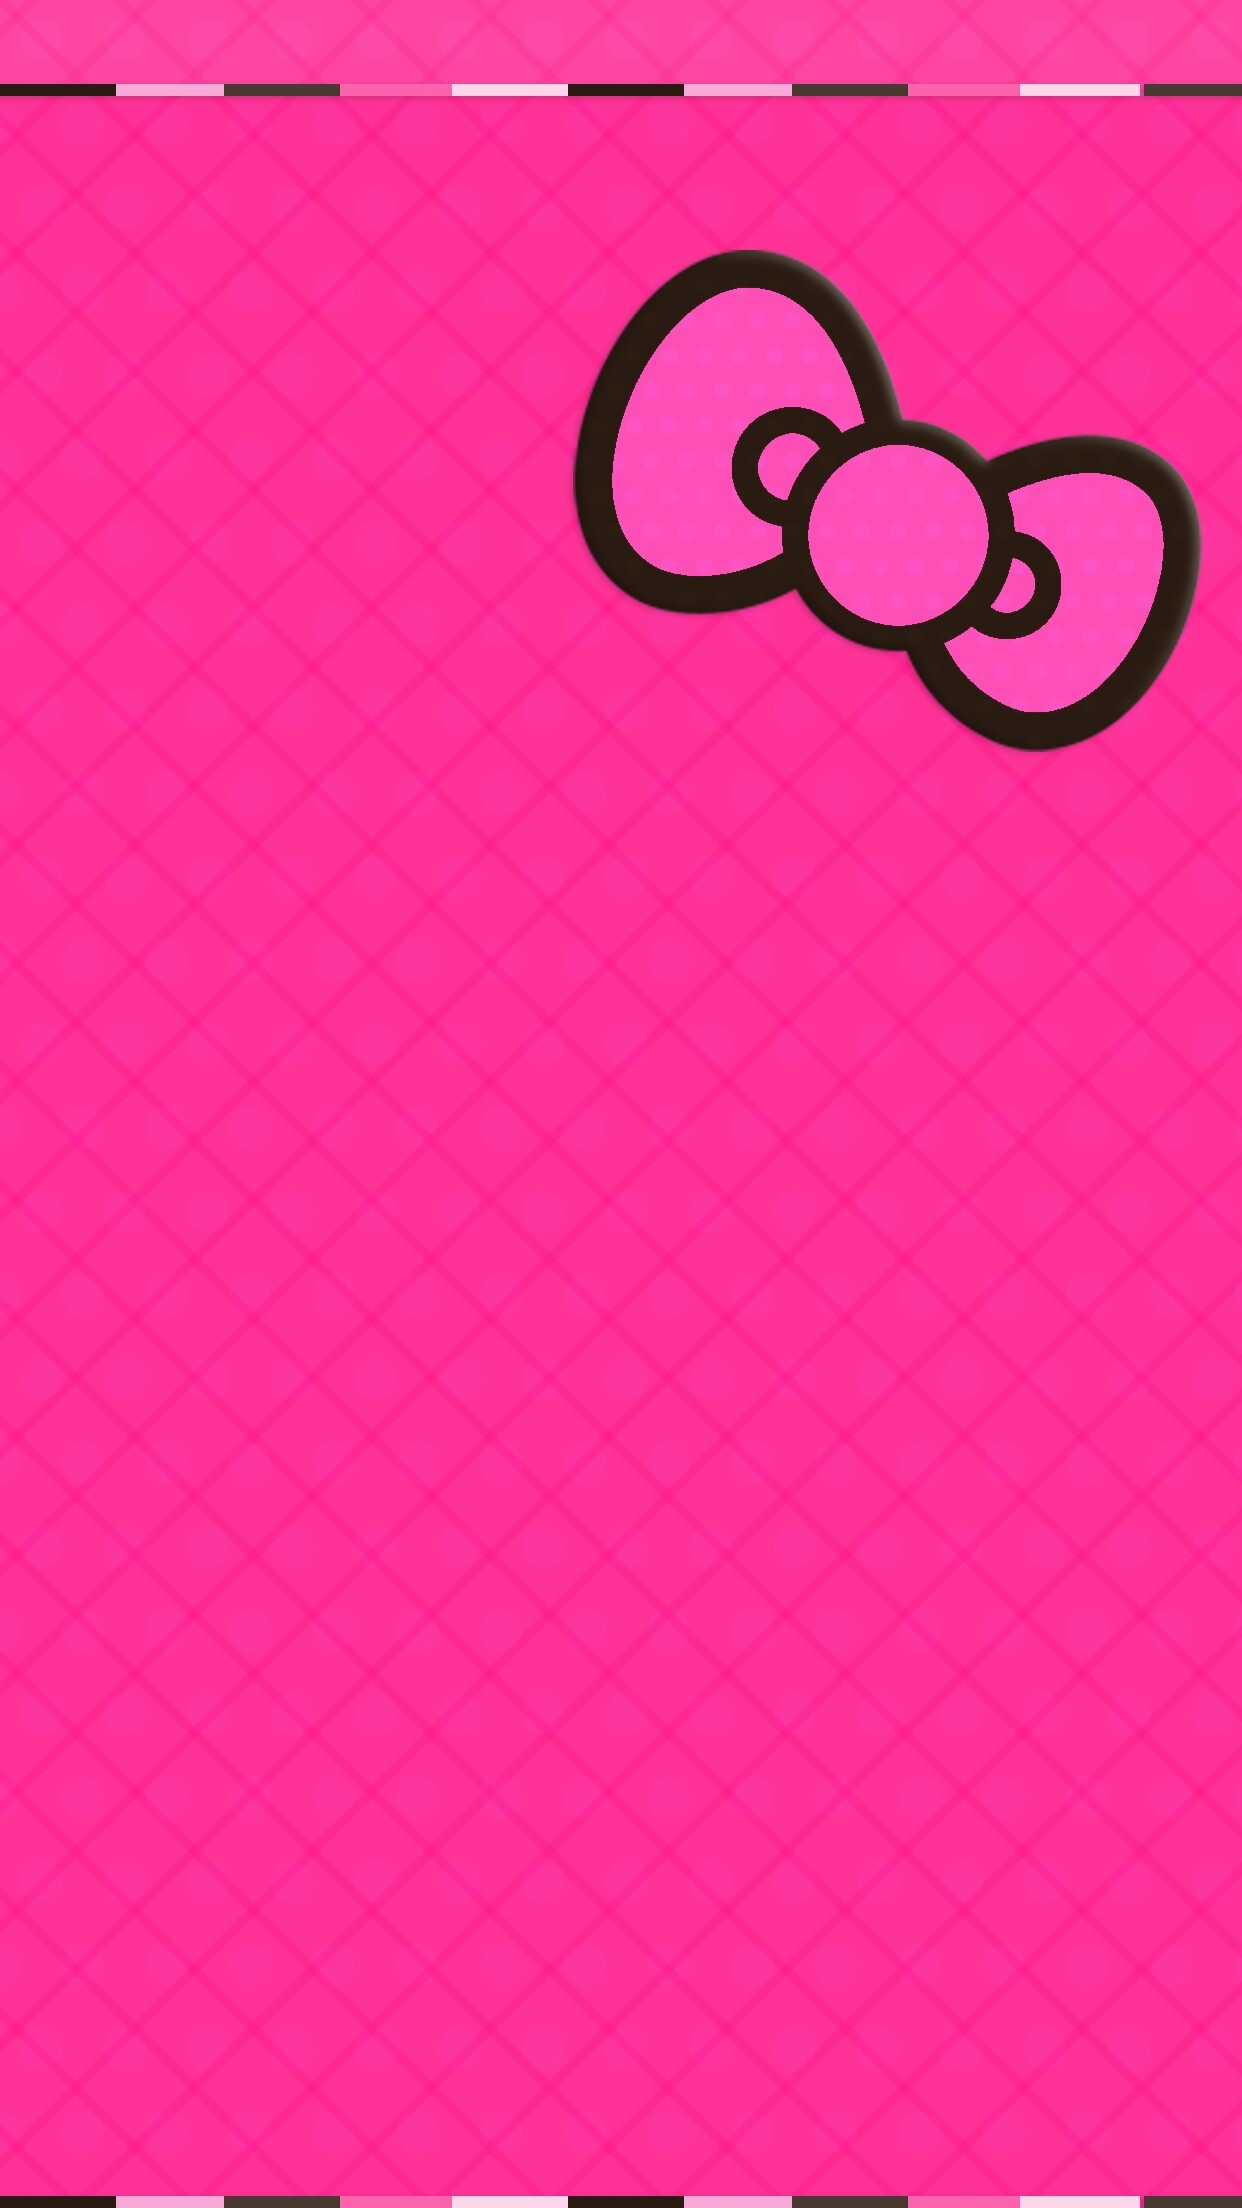 1242x2208 Bow Wallpaper, Hello Kitty Wallpaper, Wallpaper Backgrounds, Iphone  Wallpapers, Iphone 8, Sanrio, Ipod, Notebook, Samsung